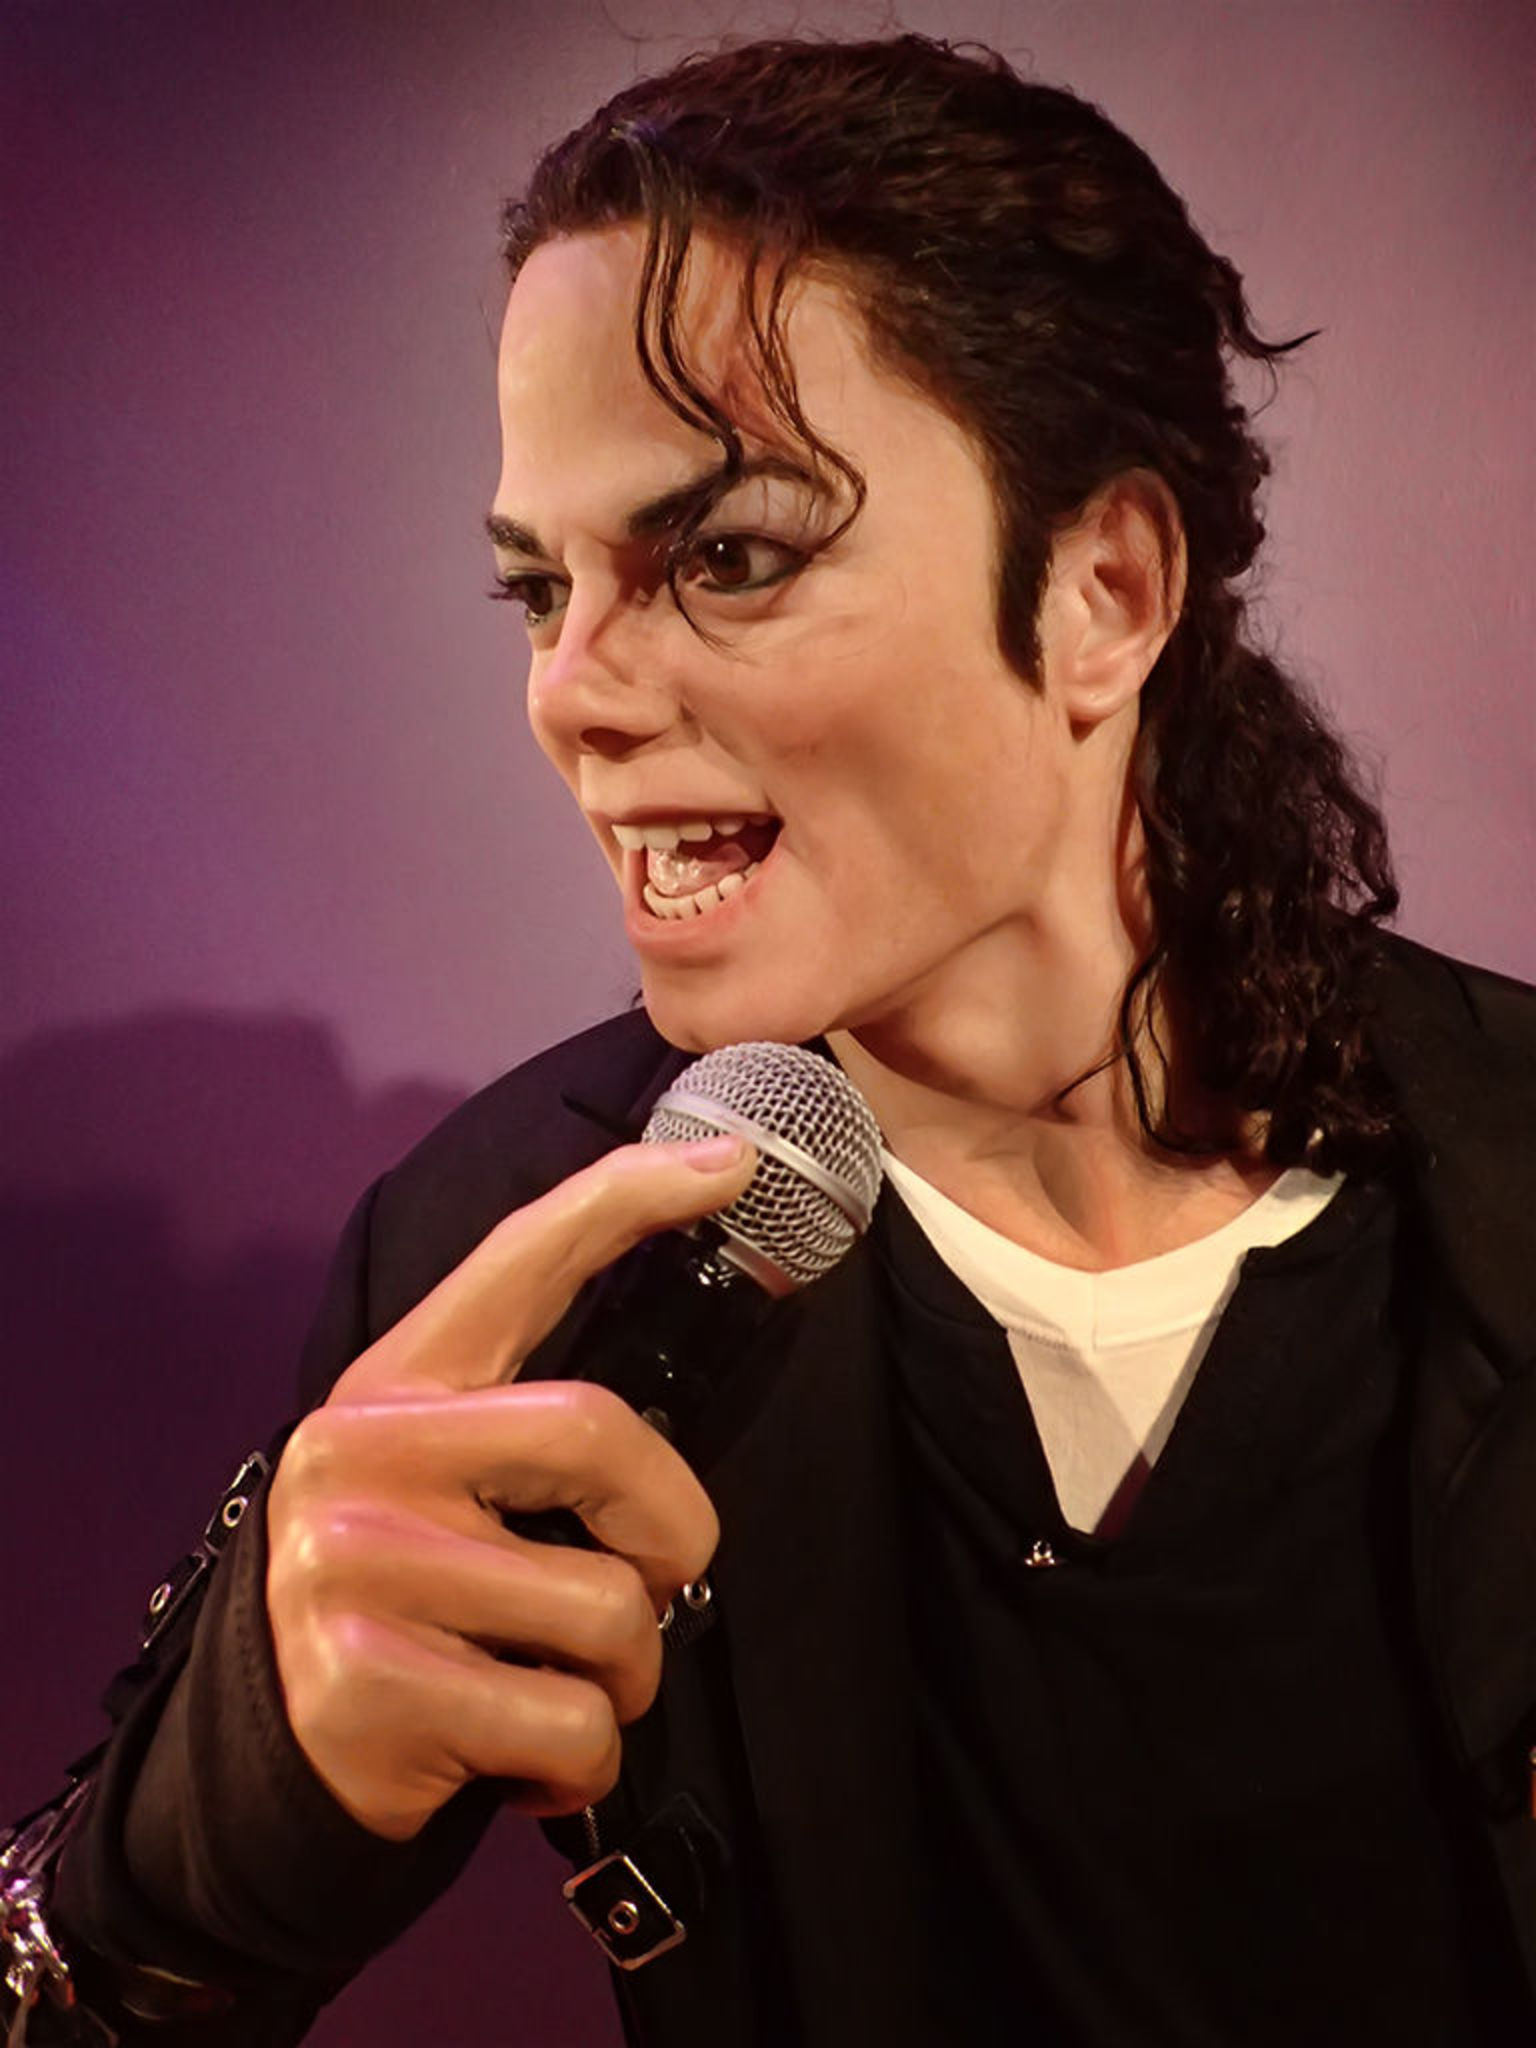 The King of Pop thrills visitors to Madame Tussauds Wax Museum